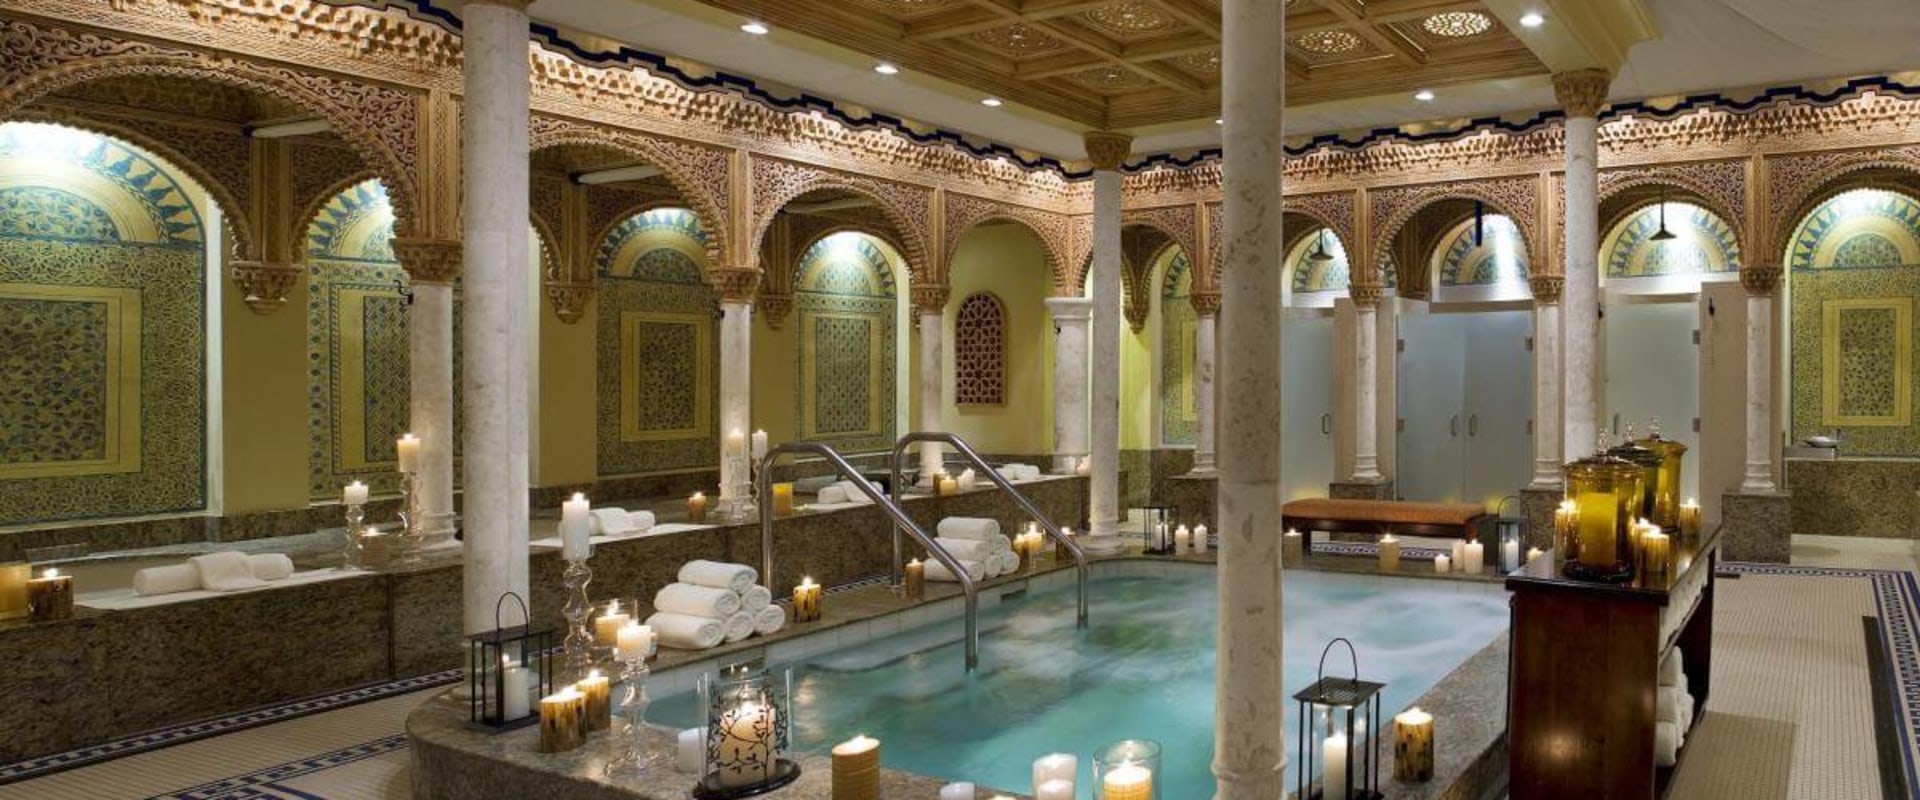 10 Amazing Spa Getaways to Relax and Rejuvenate